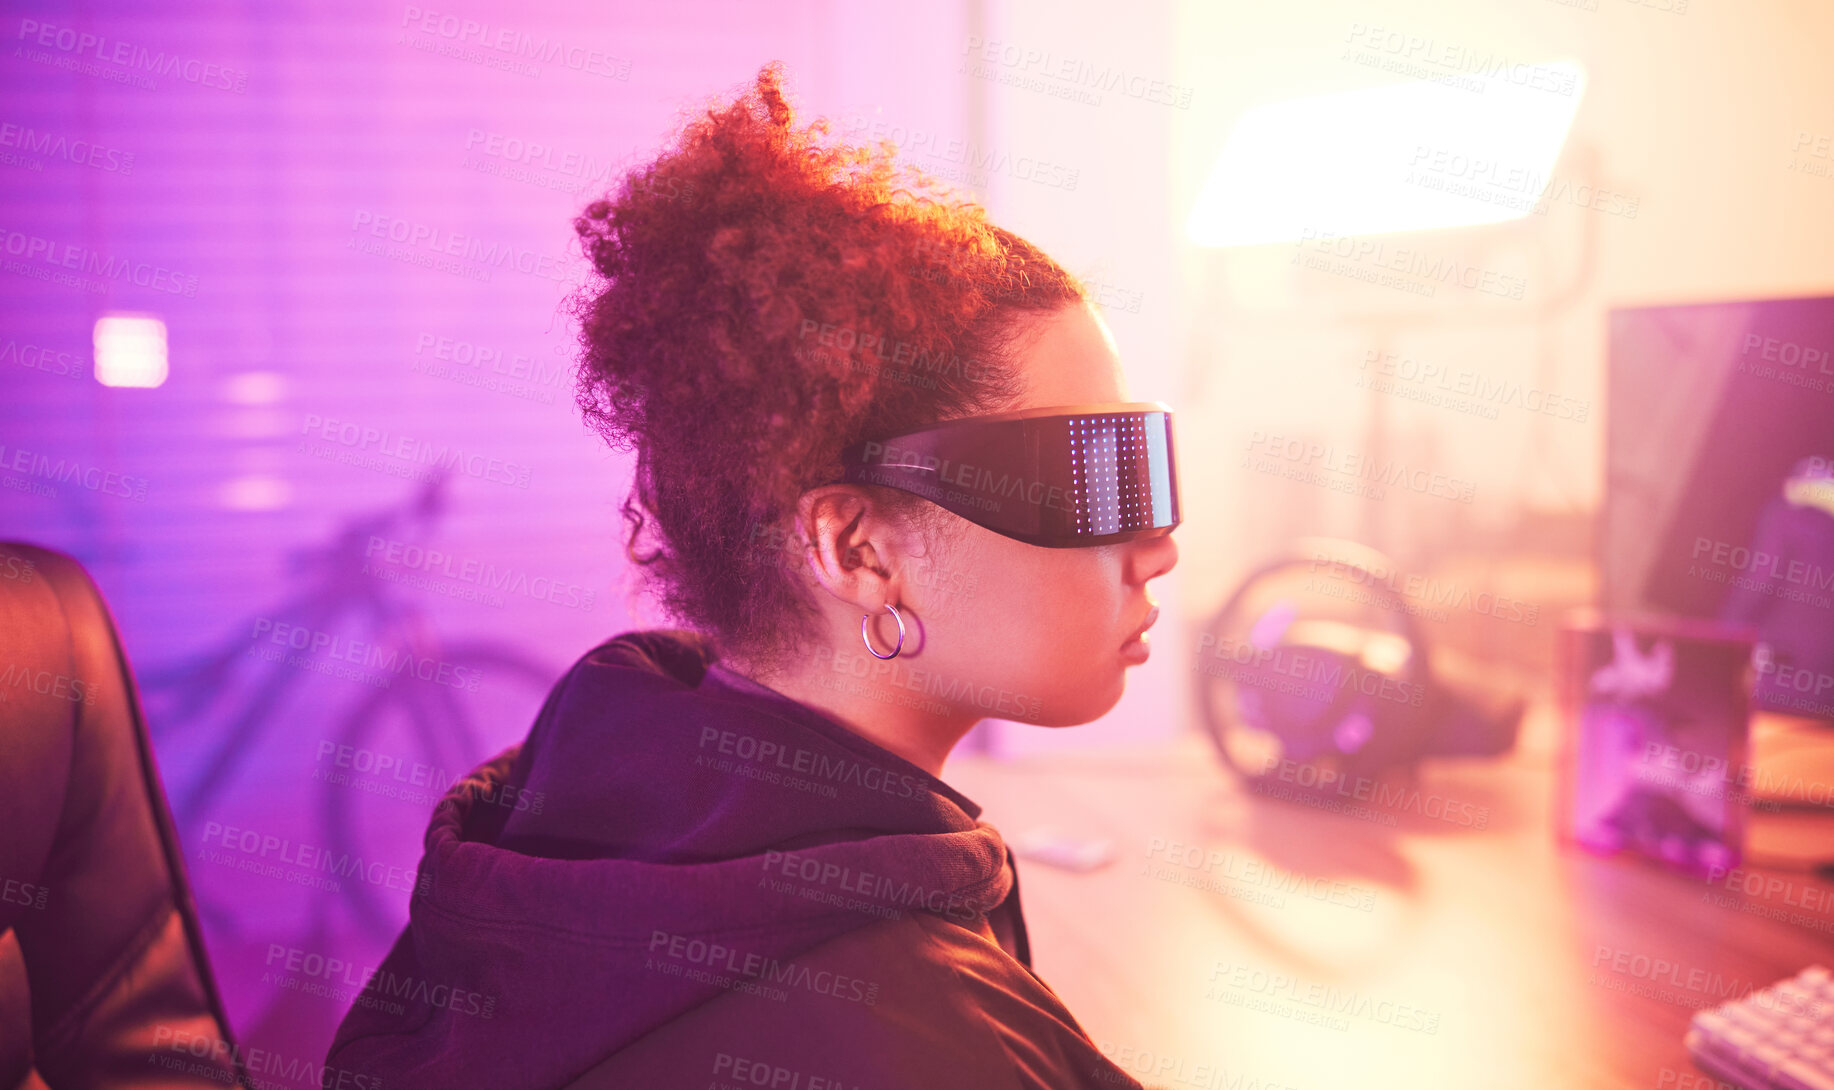 Buy stock photo Metaverse, virtual reality glasses and woman gamer for futuristic gaming in purple room. Cyberpunk person with ar tech for 3d, vr and cyber world experience streaming online digital fantasy game